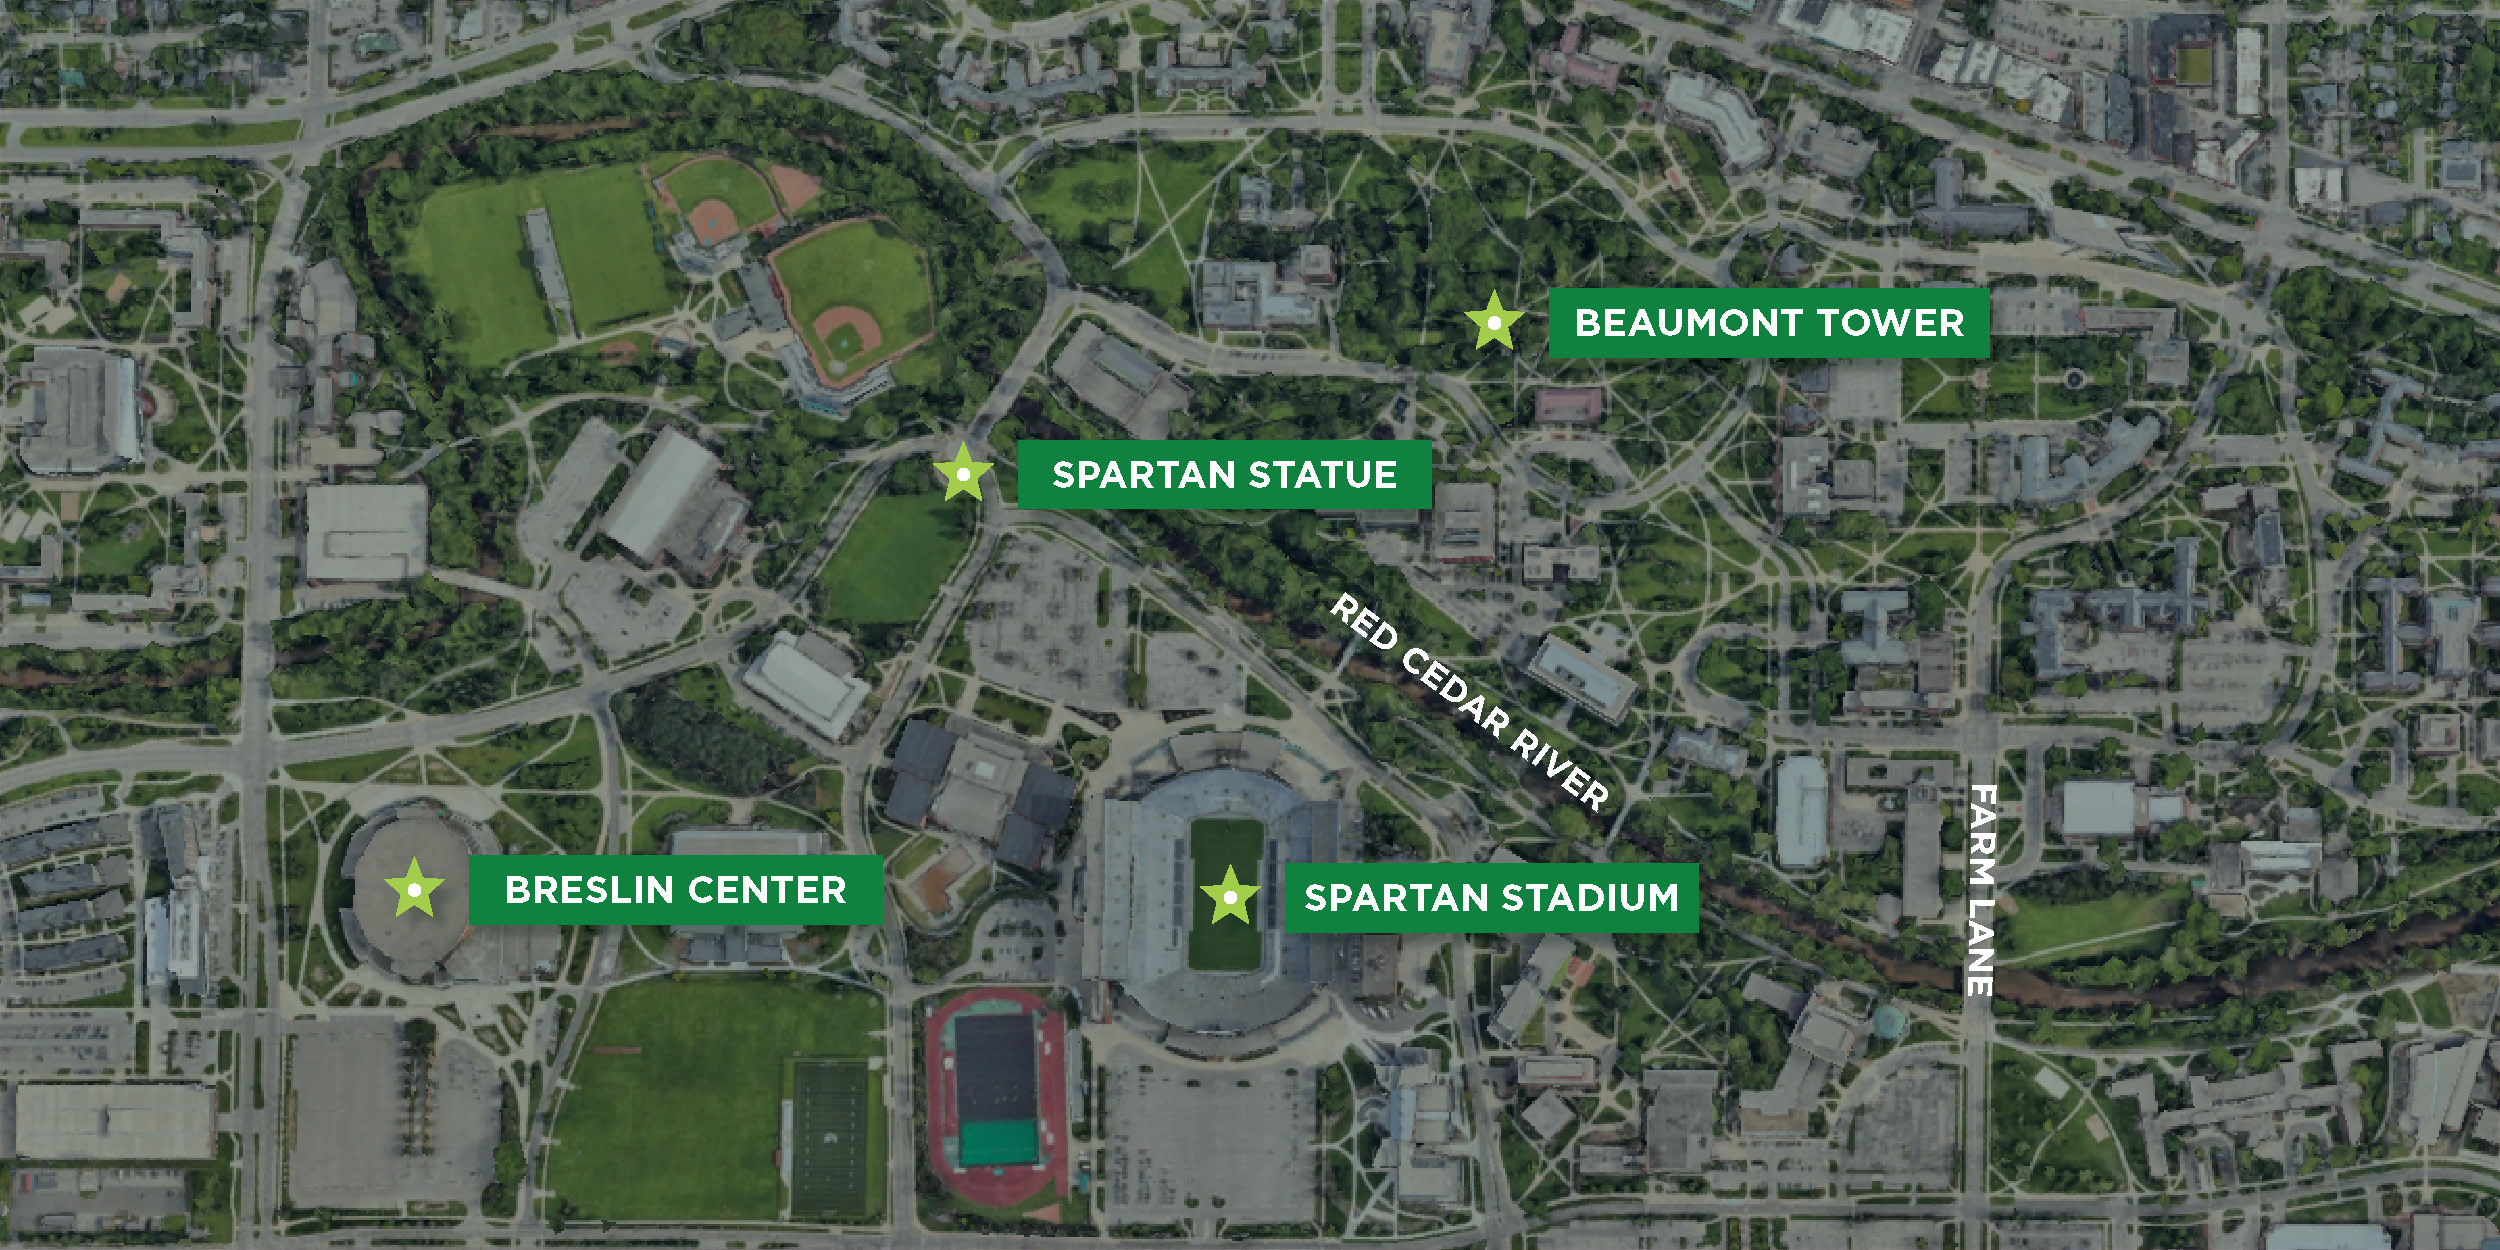 Google Earth image of MSU’s campus. White text indicates Red Cedar River and Farm Lane. Four locations are marked with a green star: Spartan Statue, Spartan Stadium, Beaumont Tower, Breslin Center.